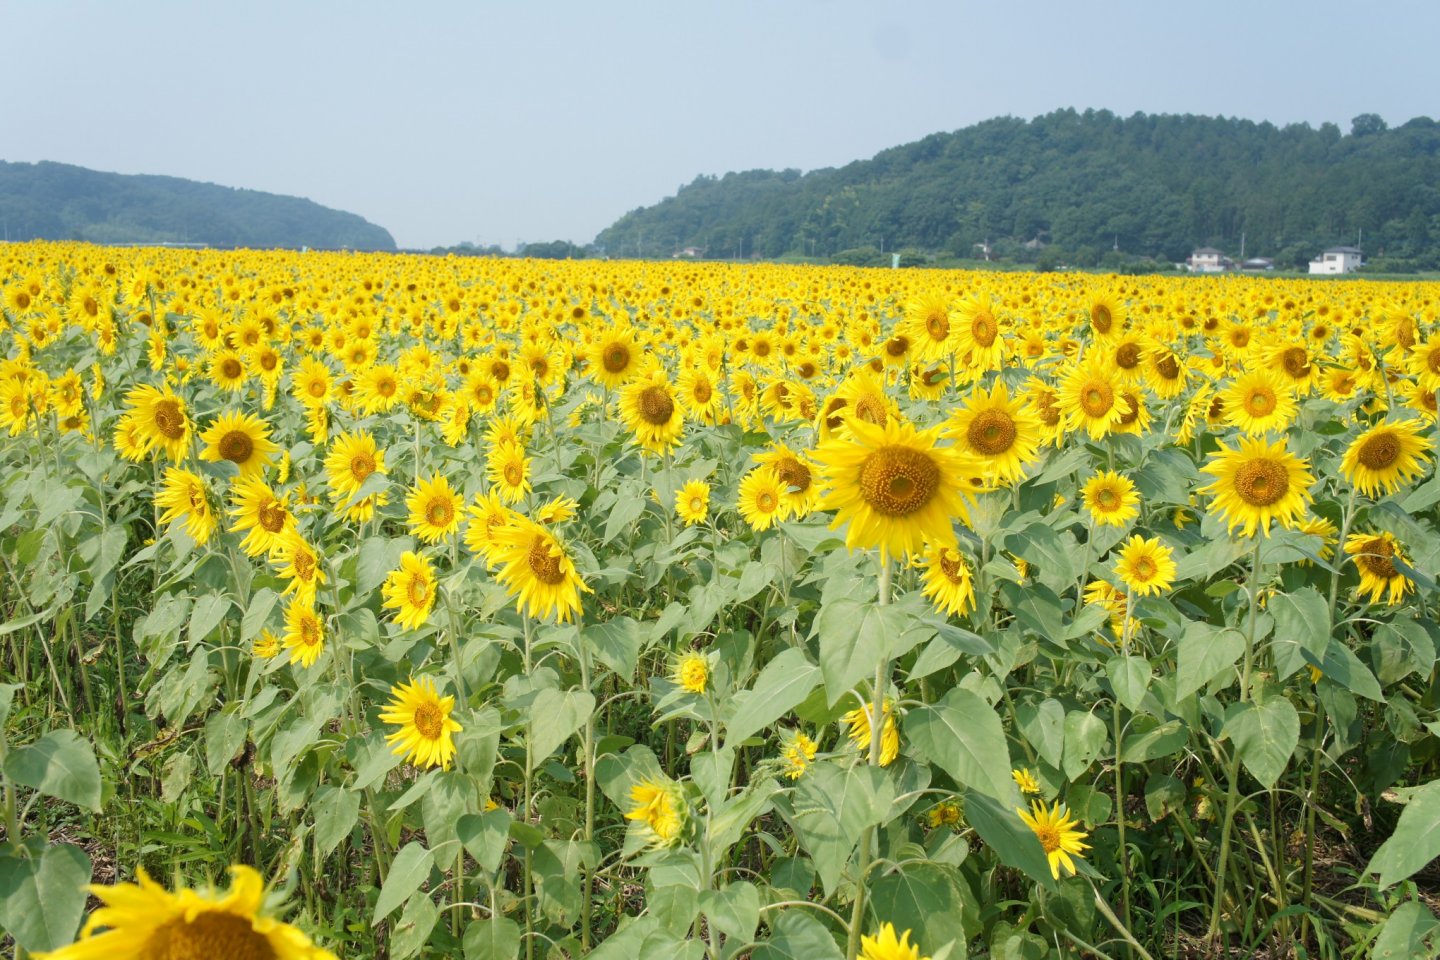 Yellow field of sunflowers stretches into the horizon